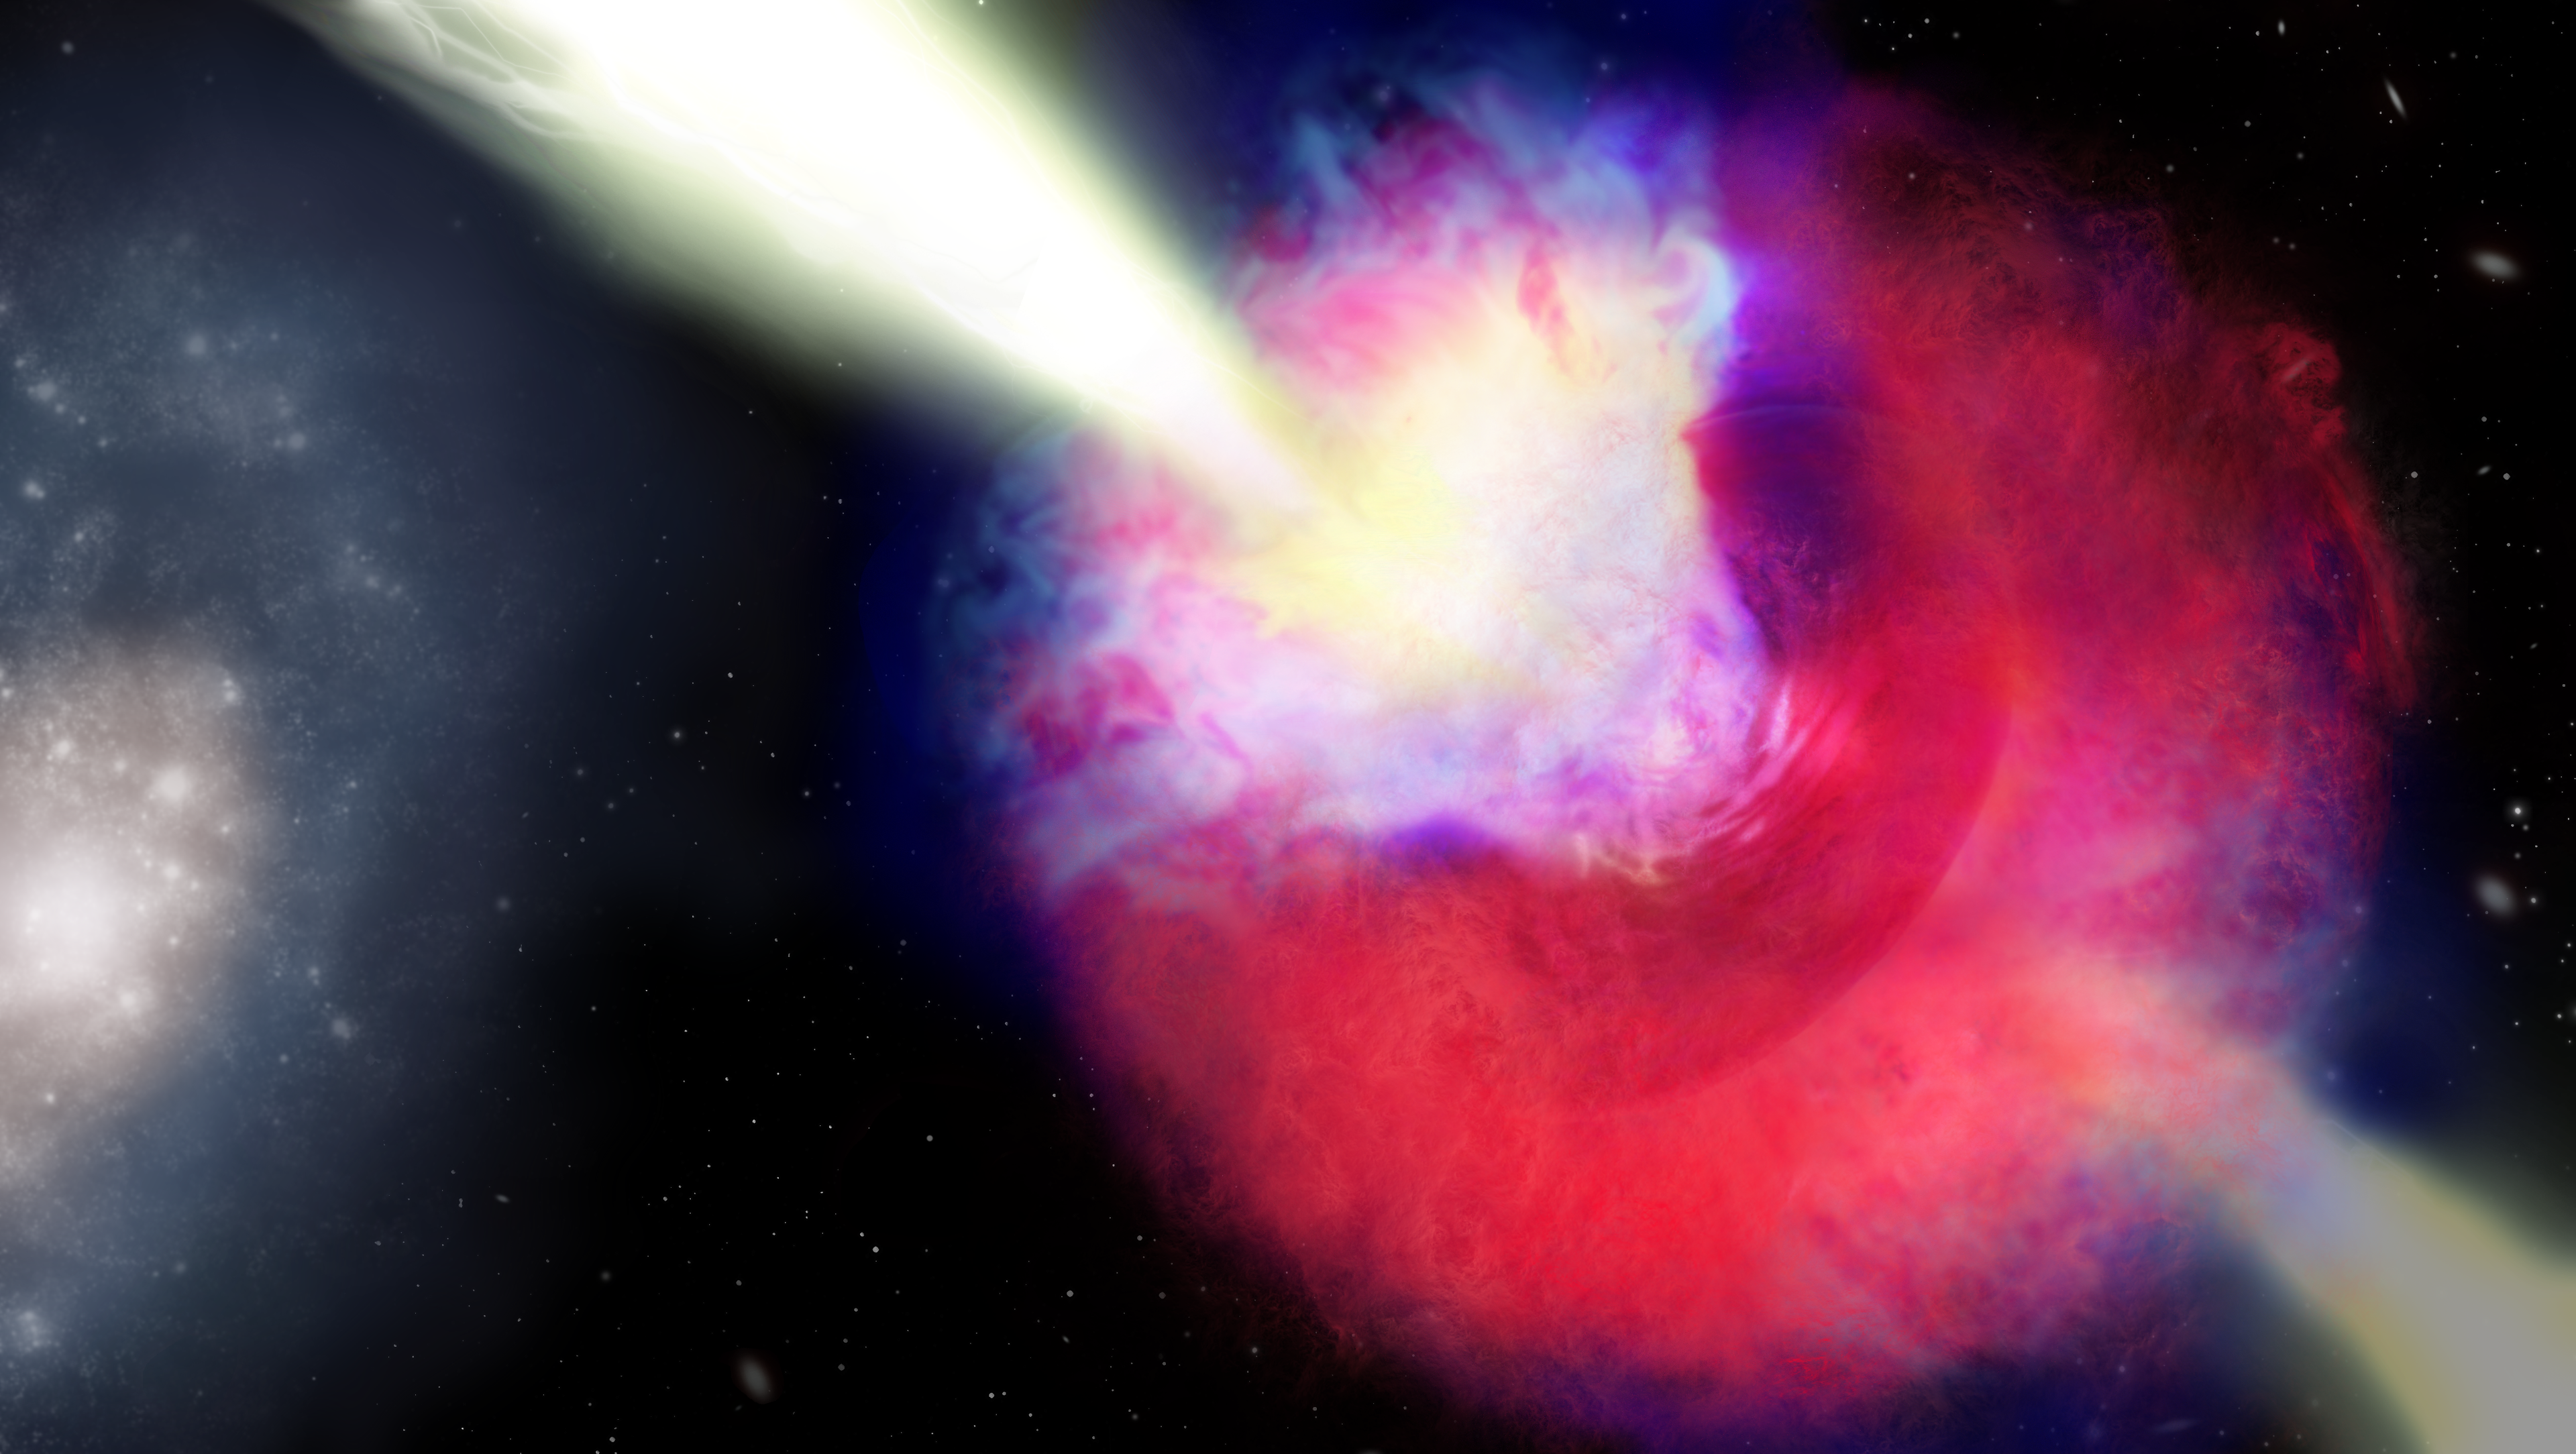 Astronomers saw a long, bright space blast, but it wasn’t a supernova